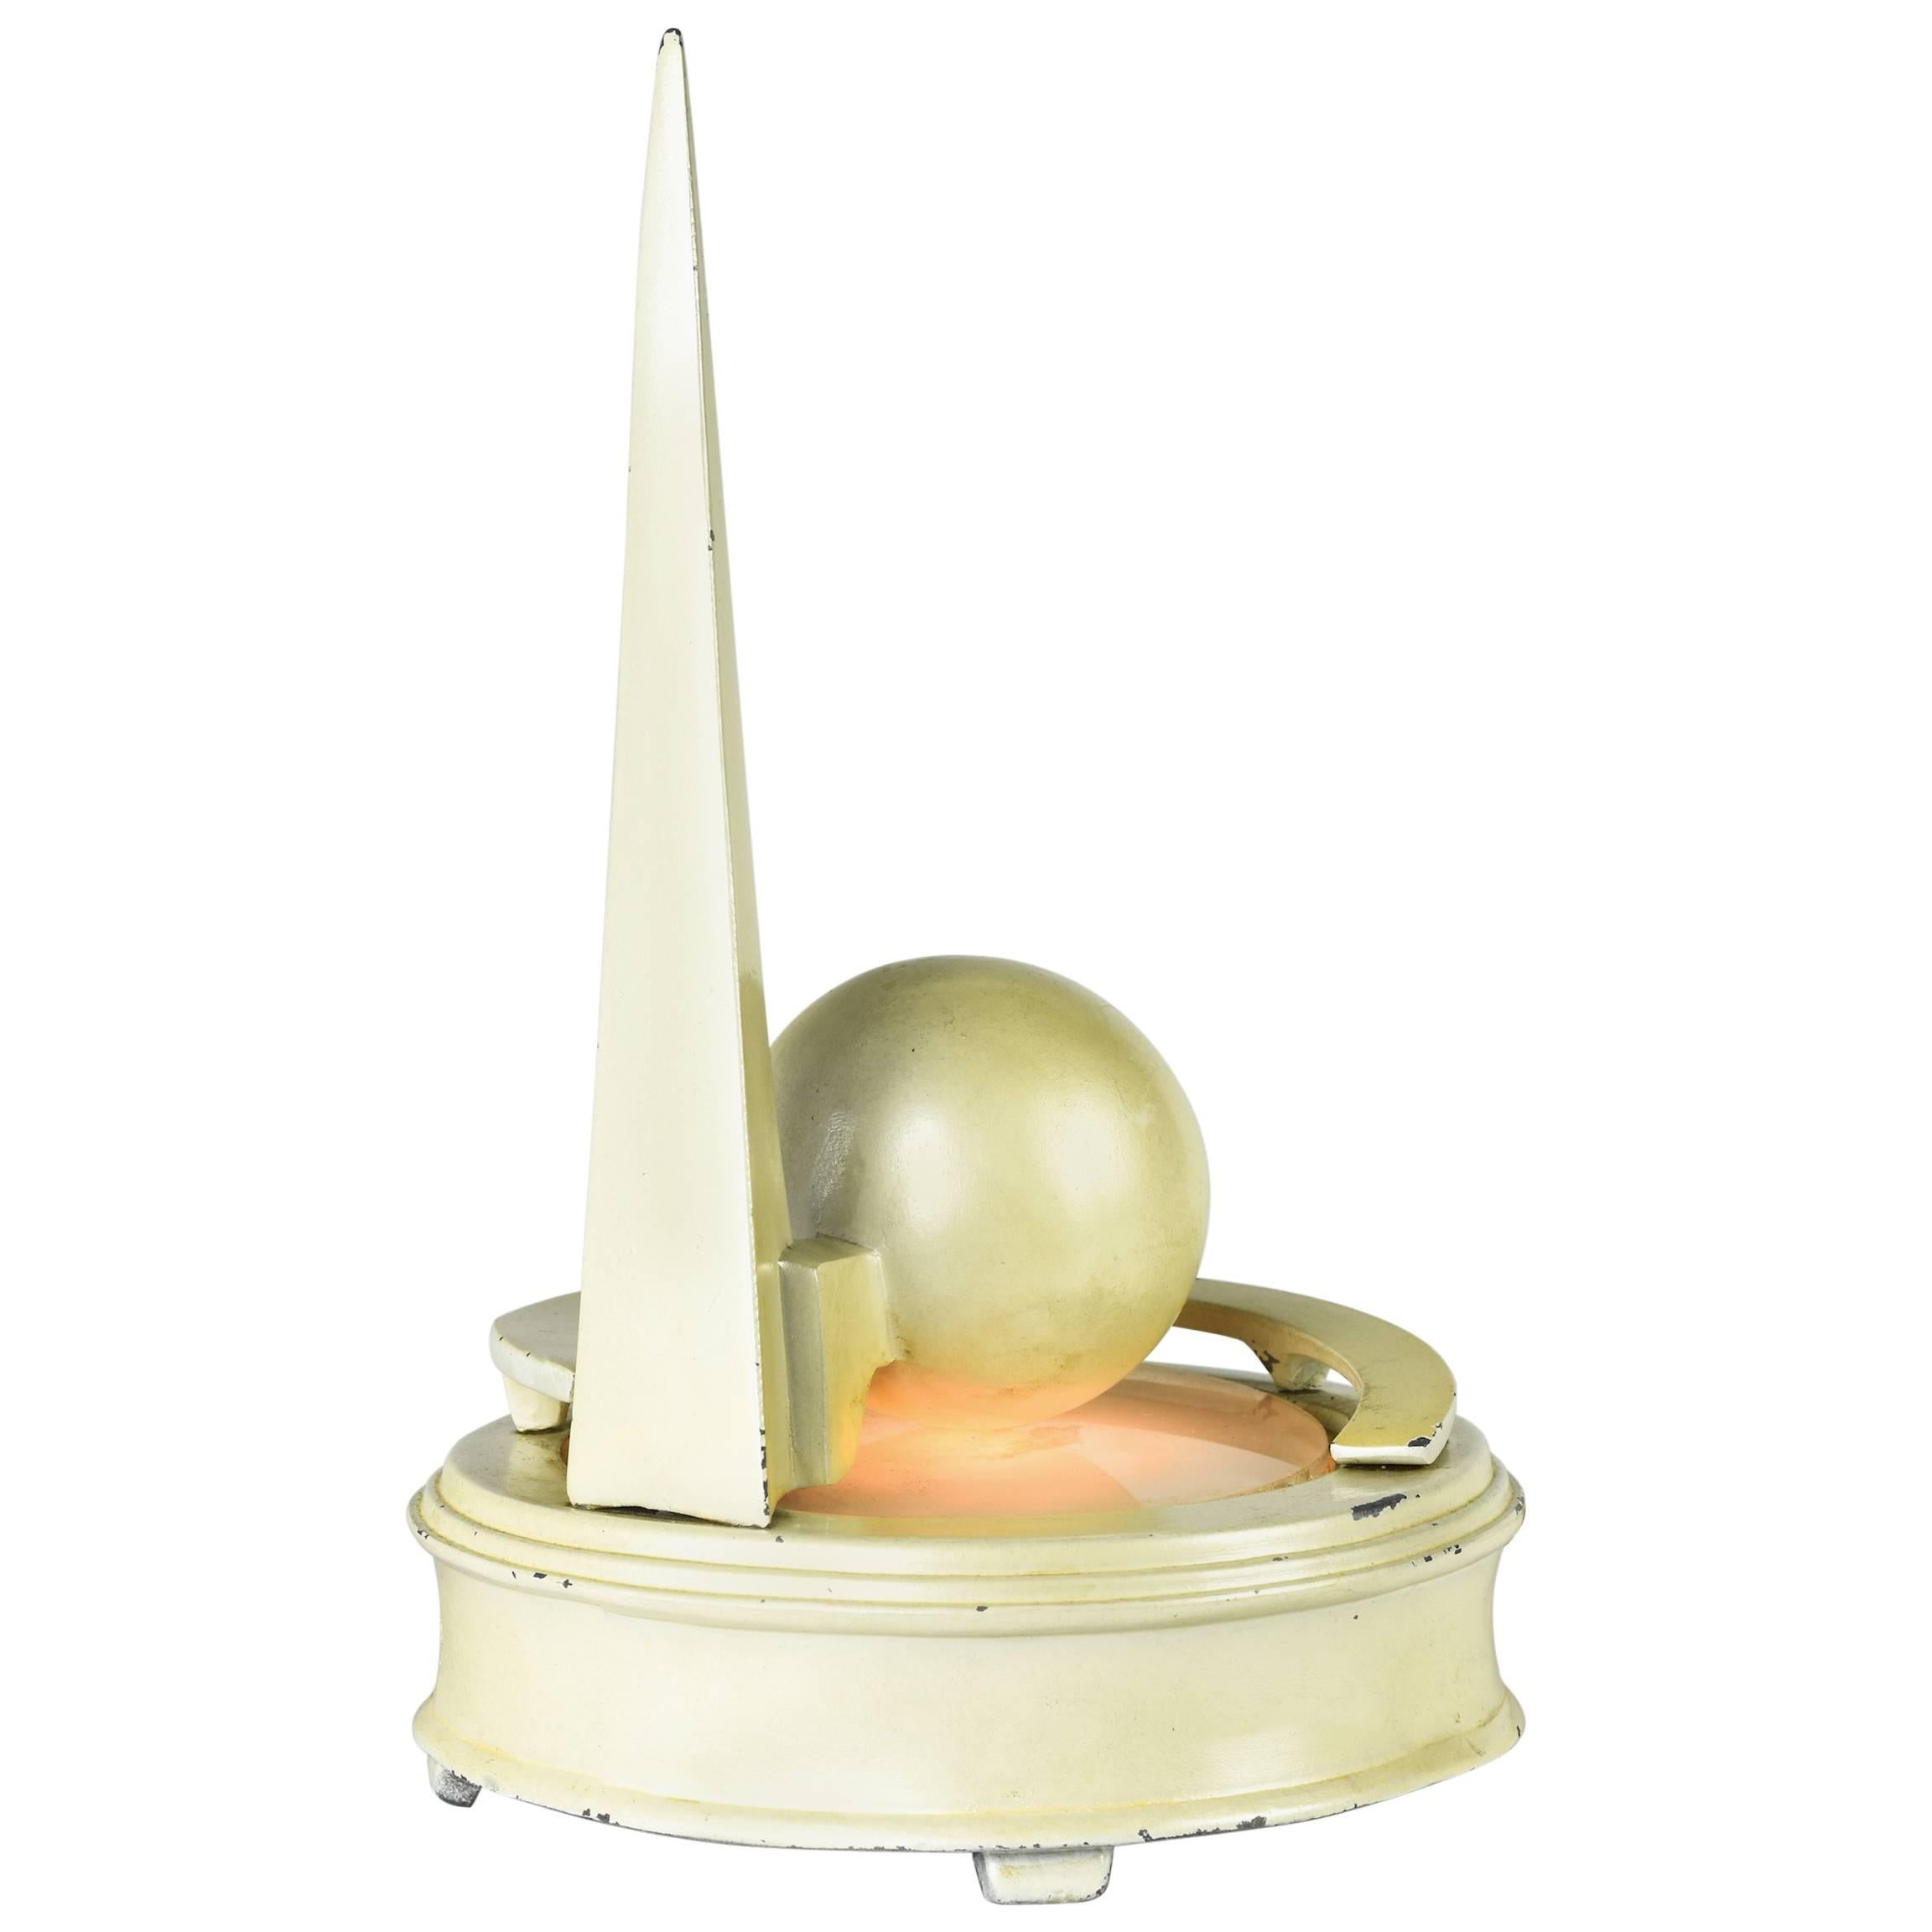 Unusual 1939 Table Lamp, Architectural Model of the Trylon & Perisphere, NYWF